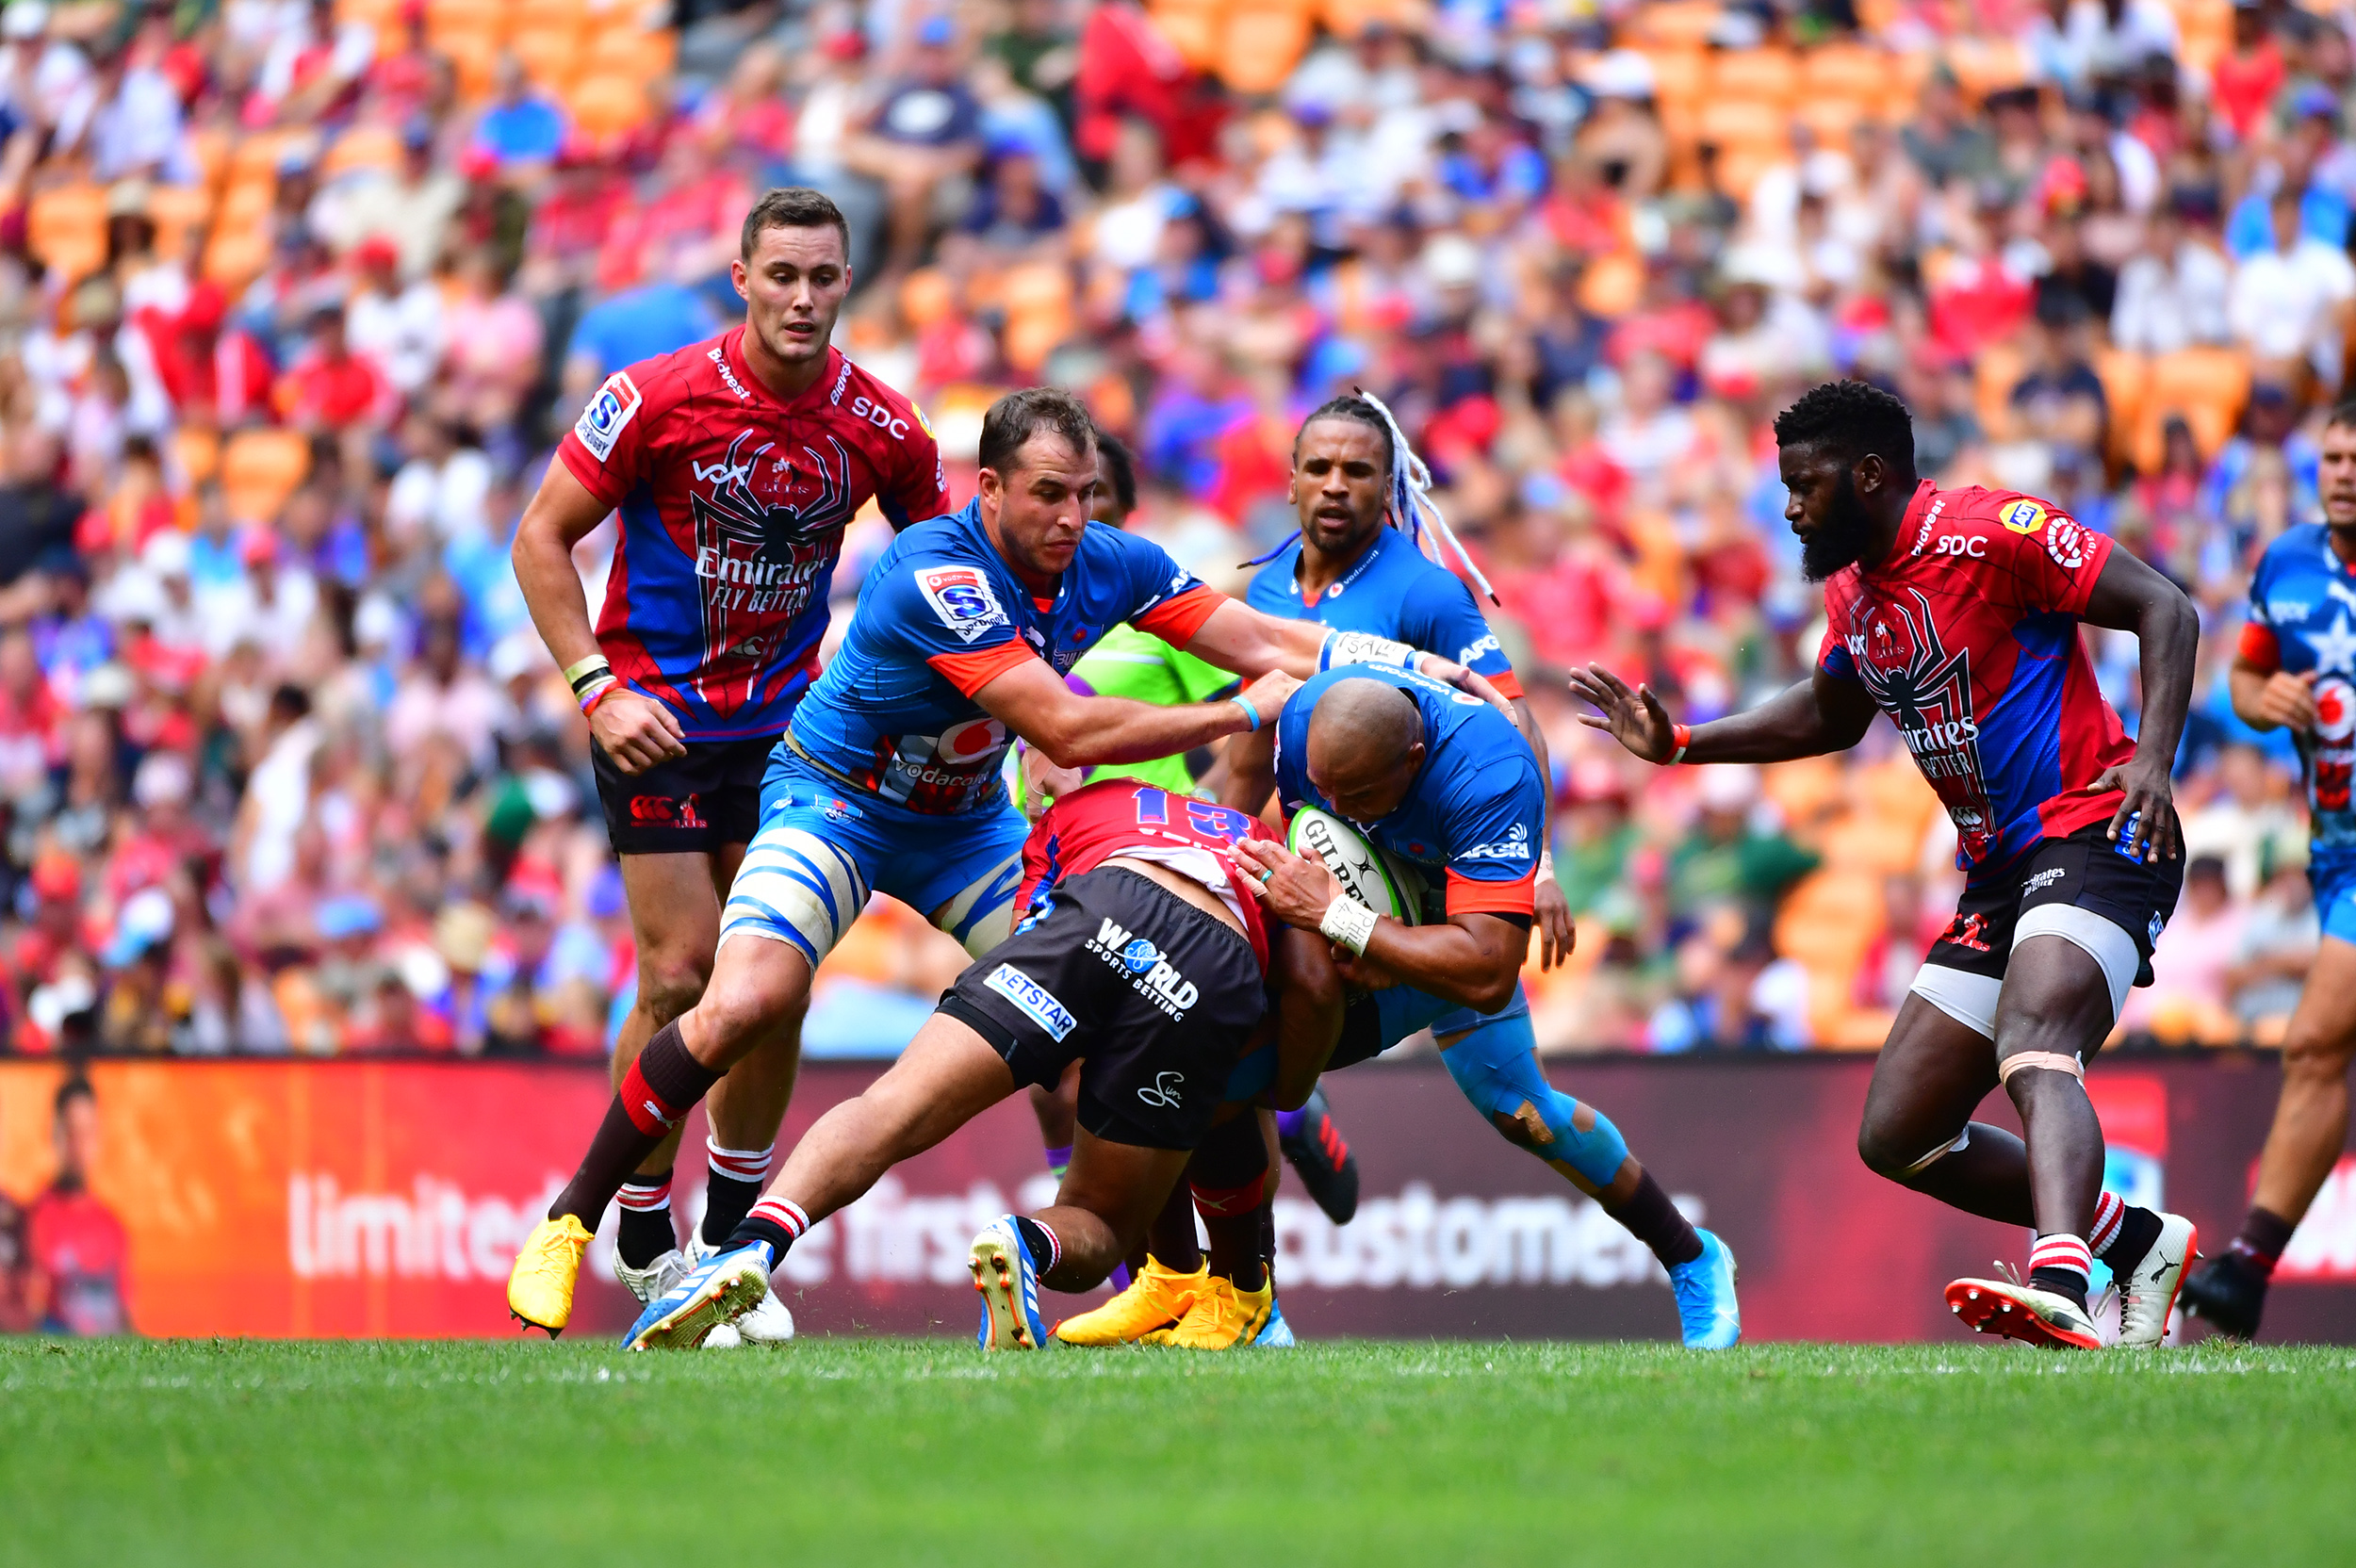 Vodacom Bulls Fitness Update brought to you by NeoLife SA – 17 March 2020